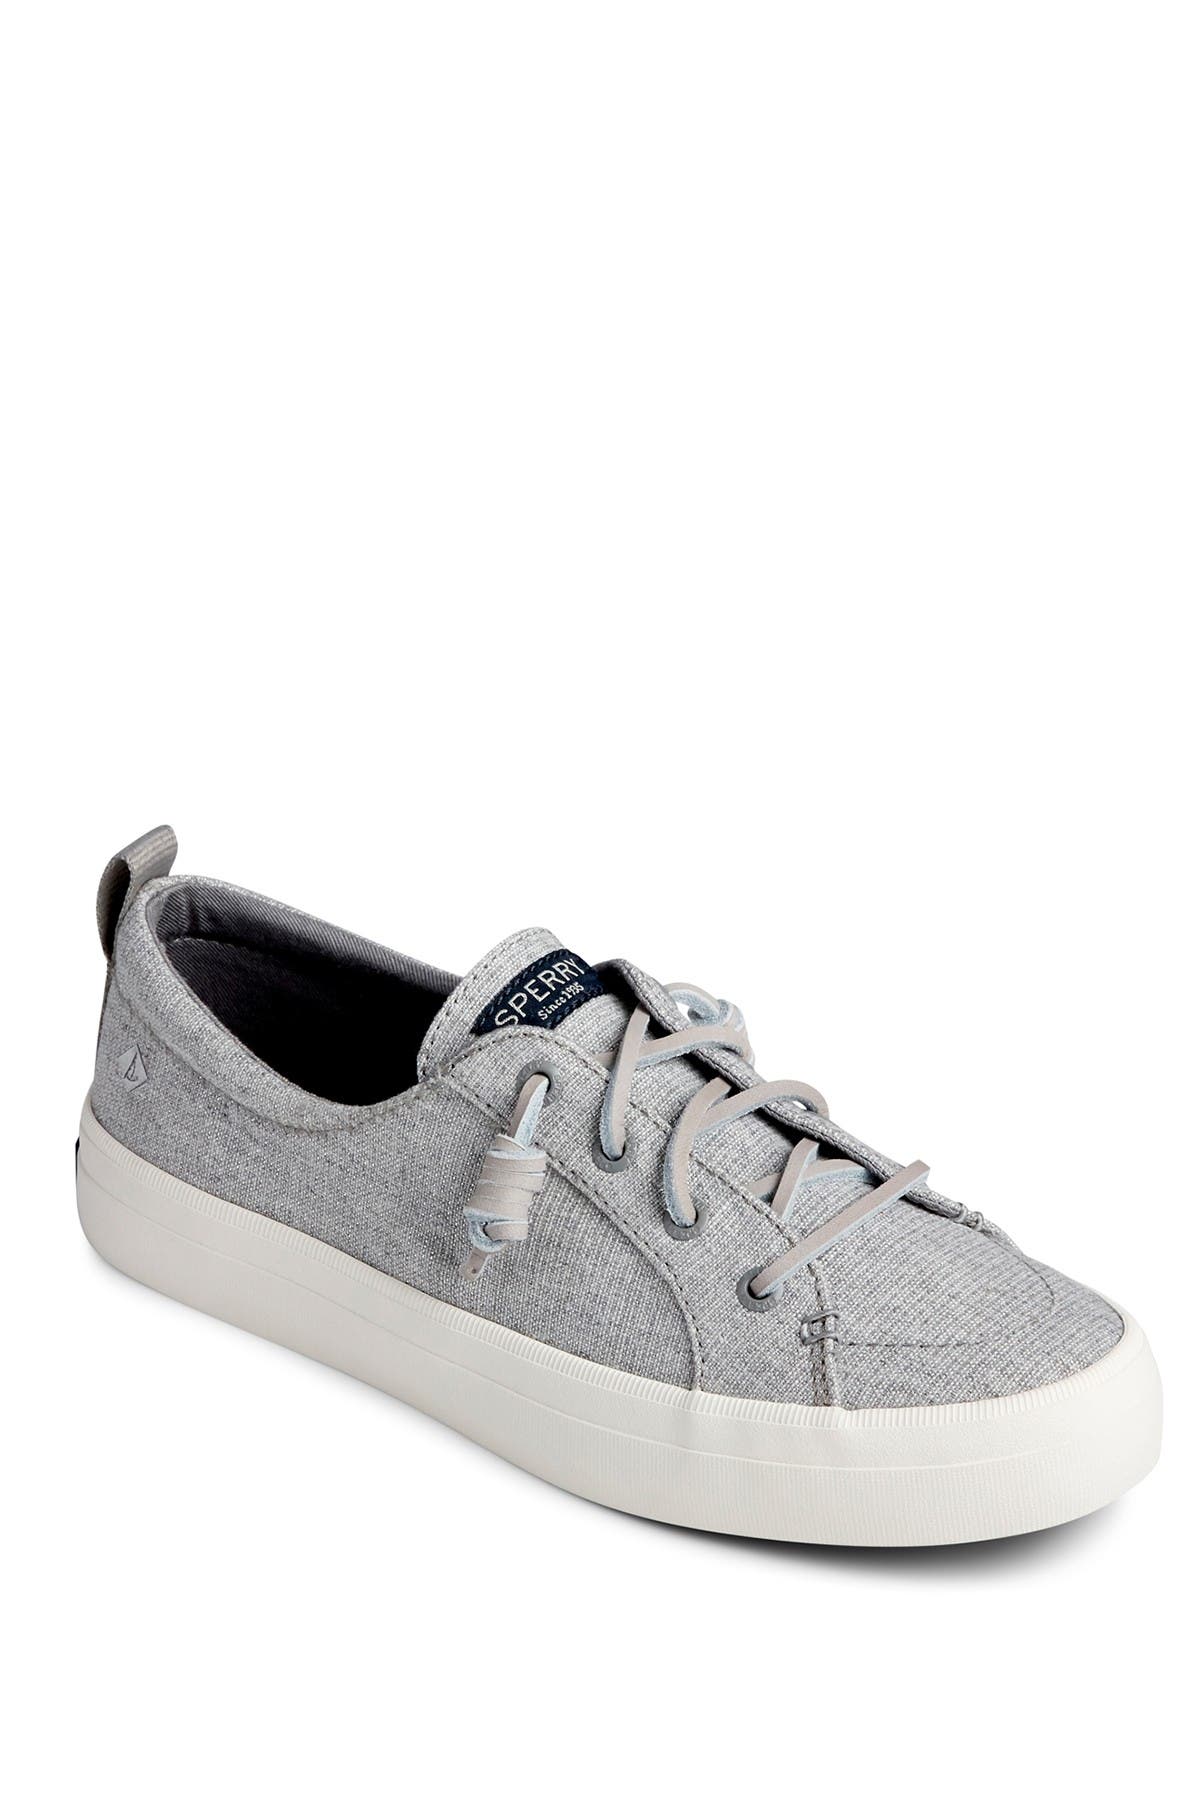 sperry sparkle sneakers